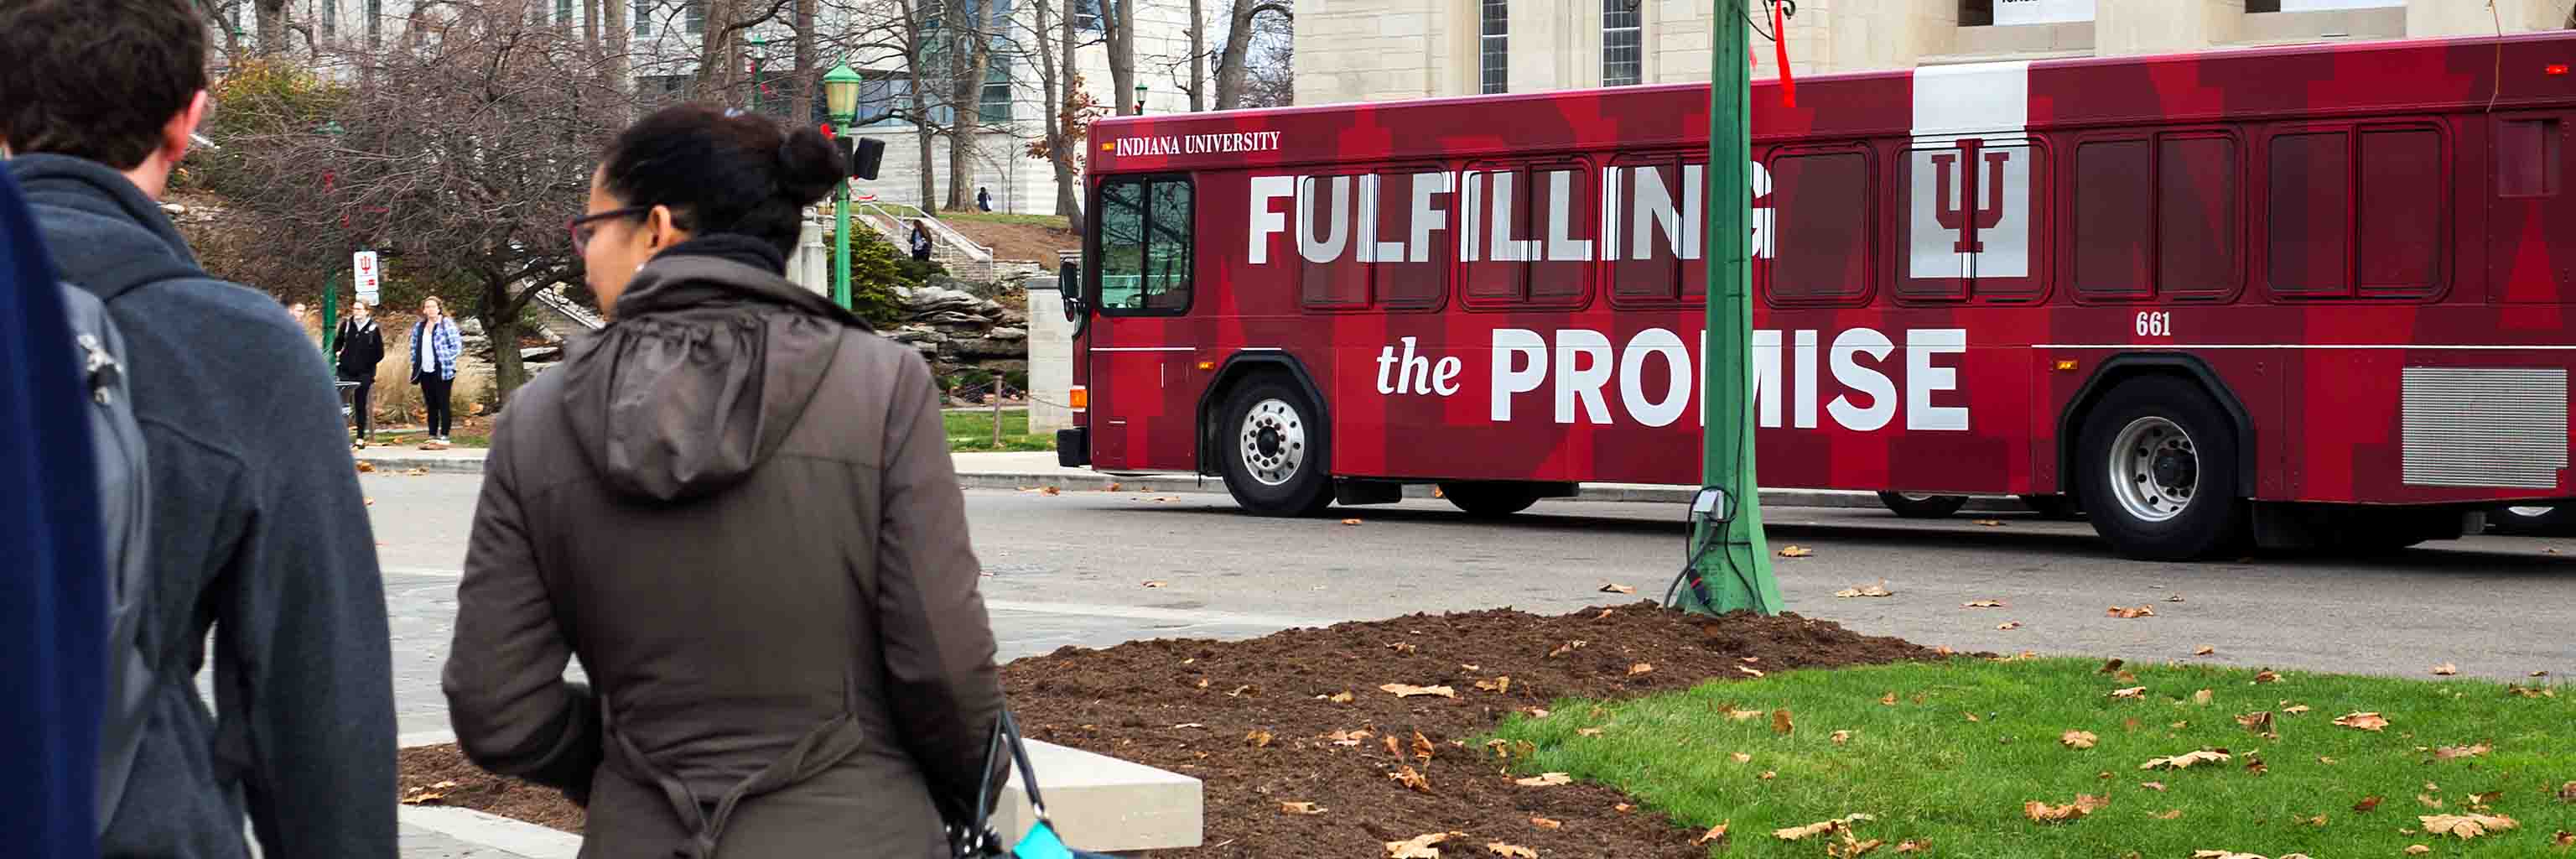 two students walking towards an IU "fulfilling the promise" bus.